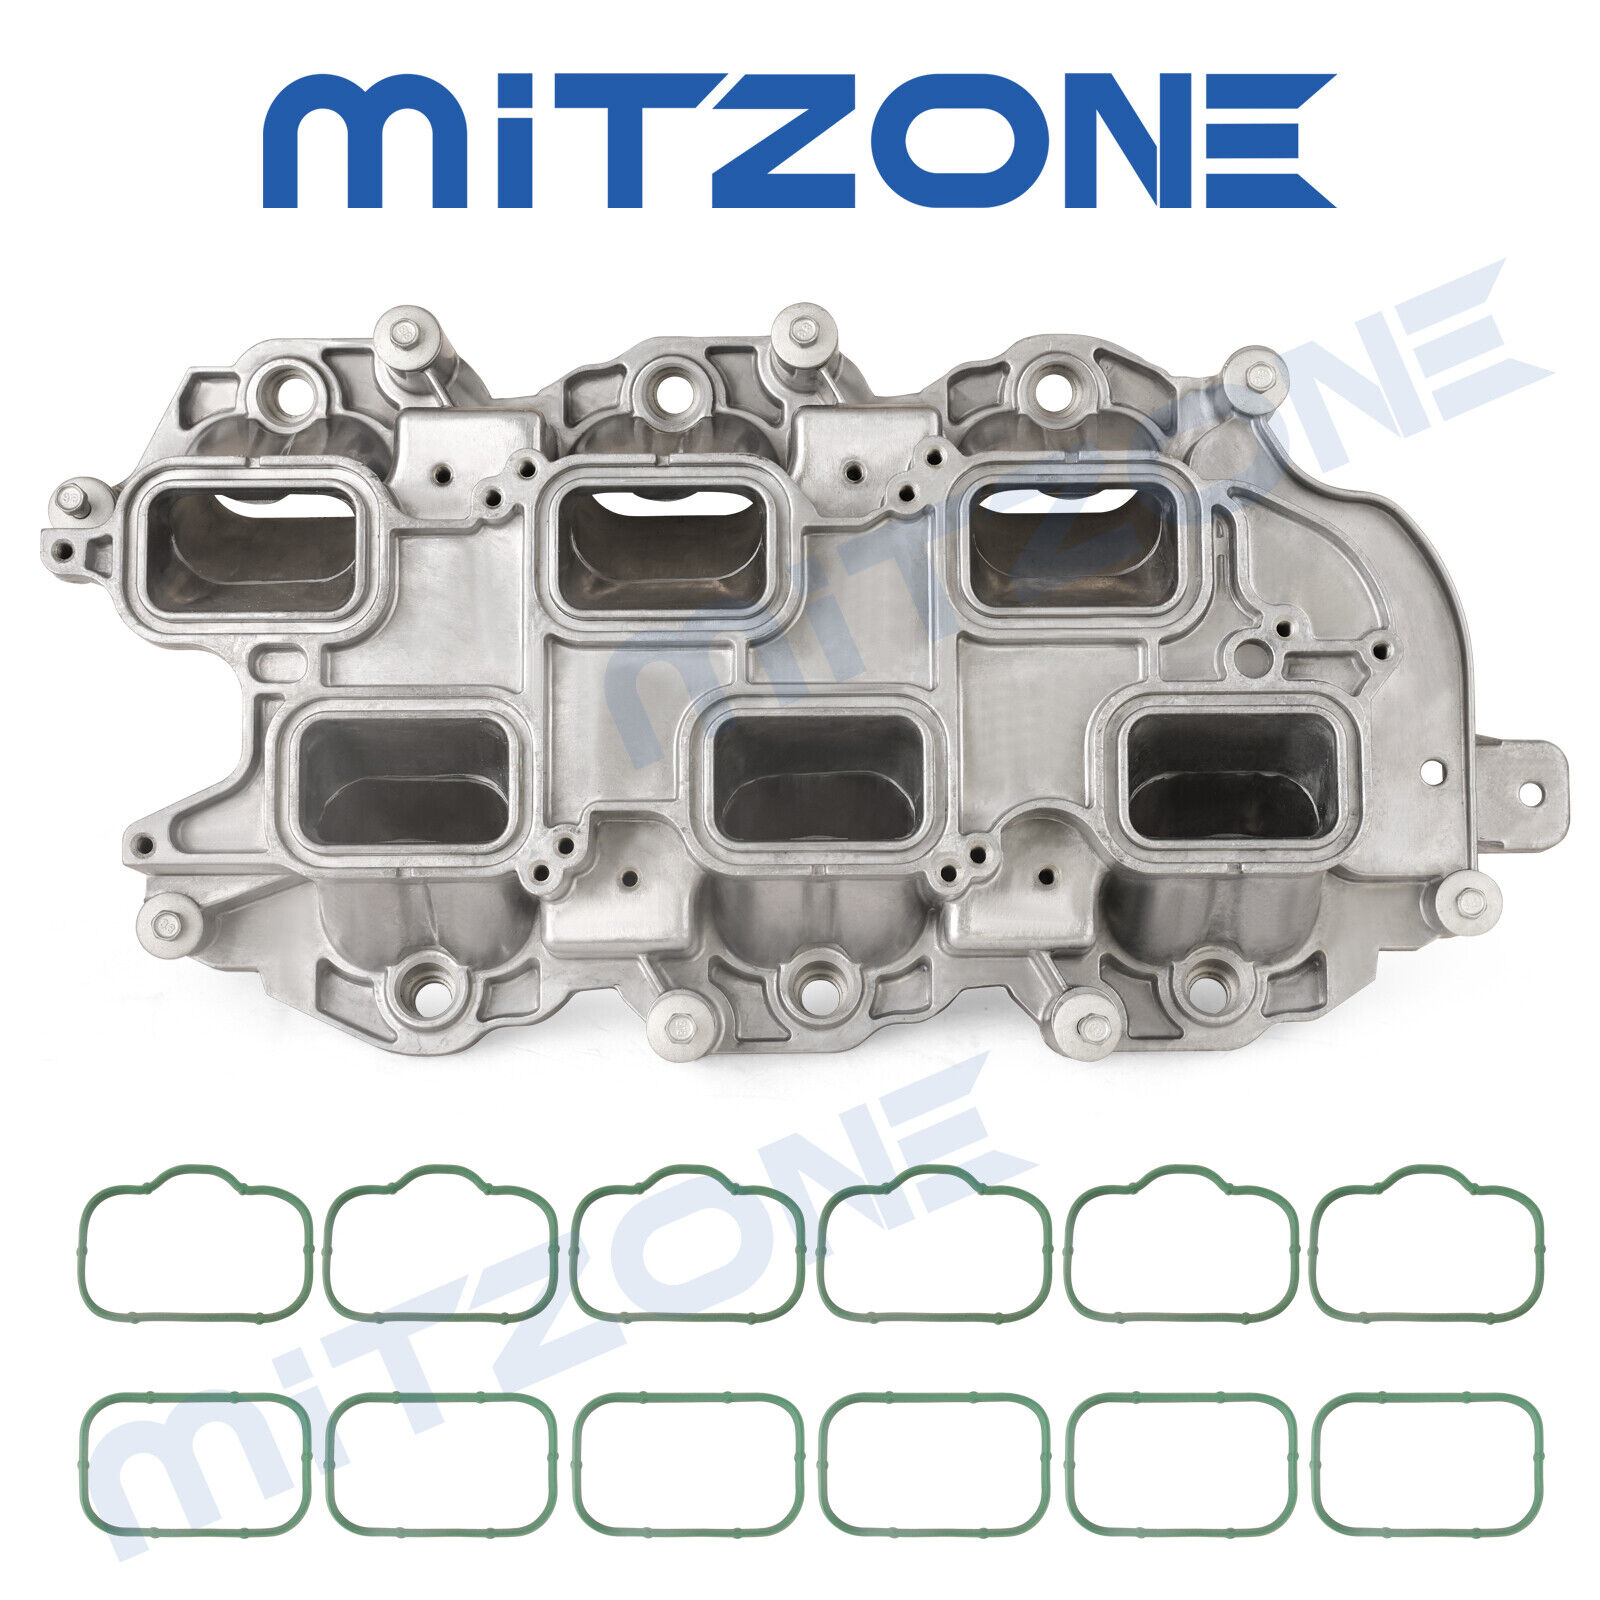 Aluminum Lower Intake Manifold for 2011-21 Dodge Challenger Charger Journey 3.6L